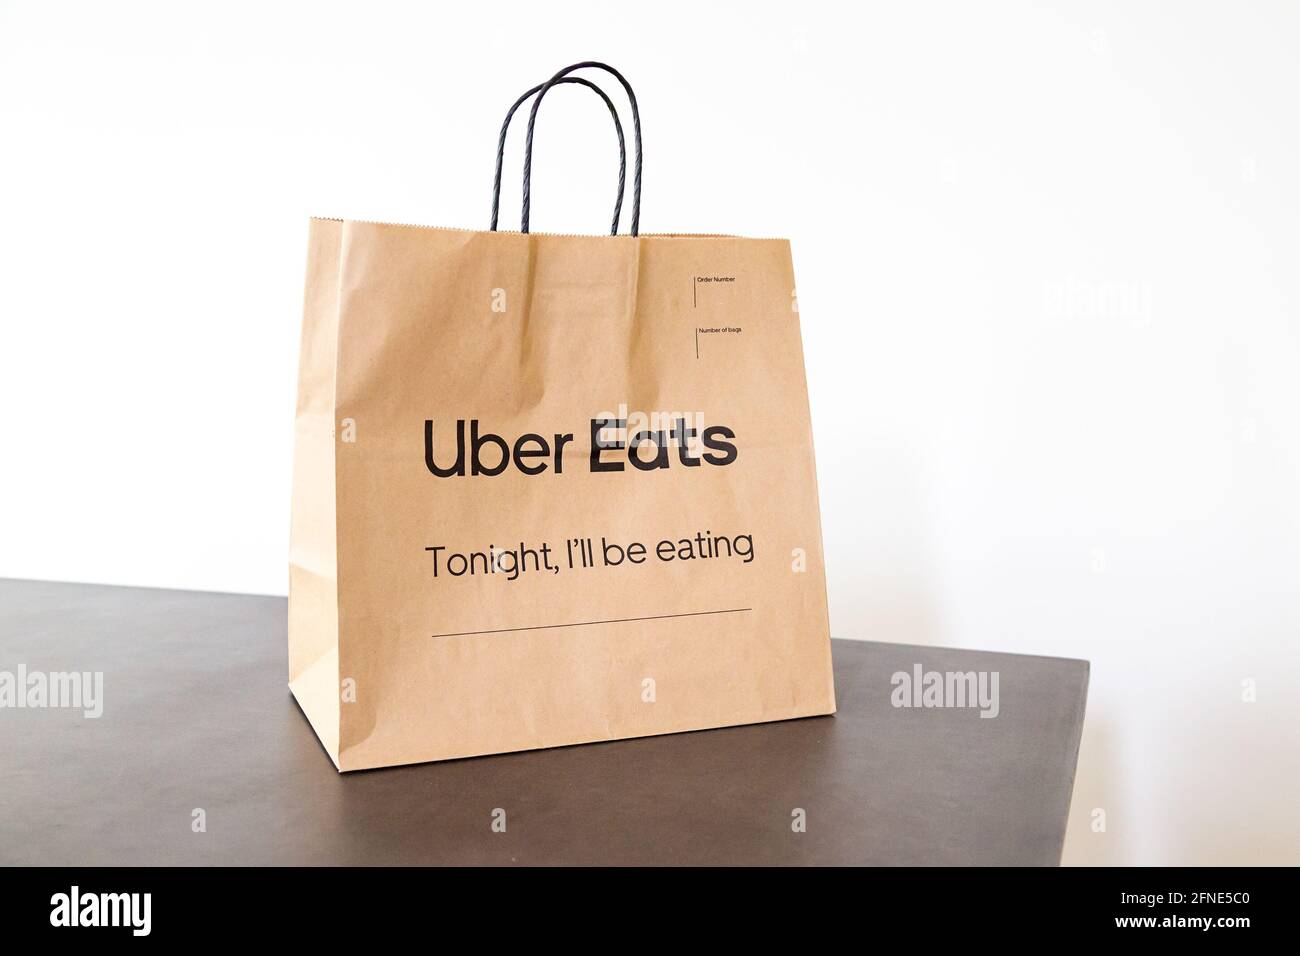 Uber Eats paper delivery bag on dining table Stock Photo - Alamy